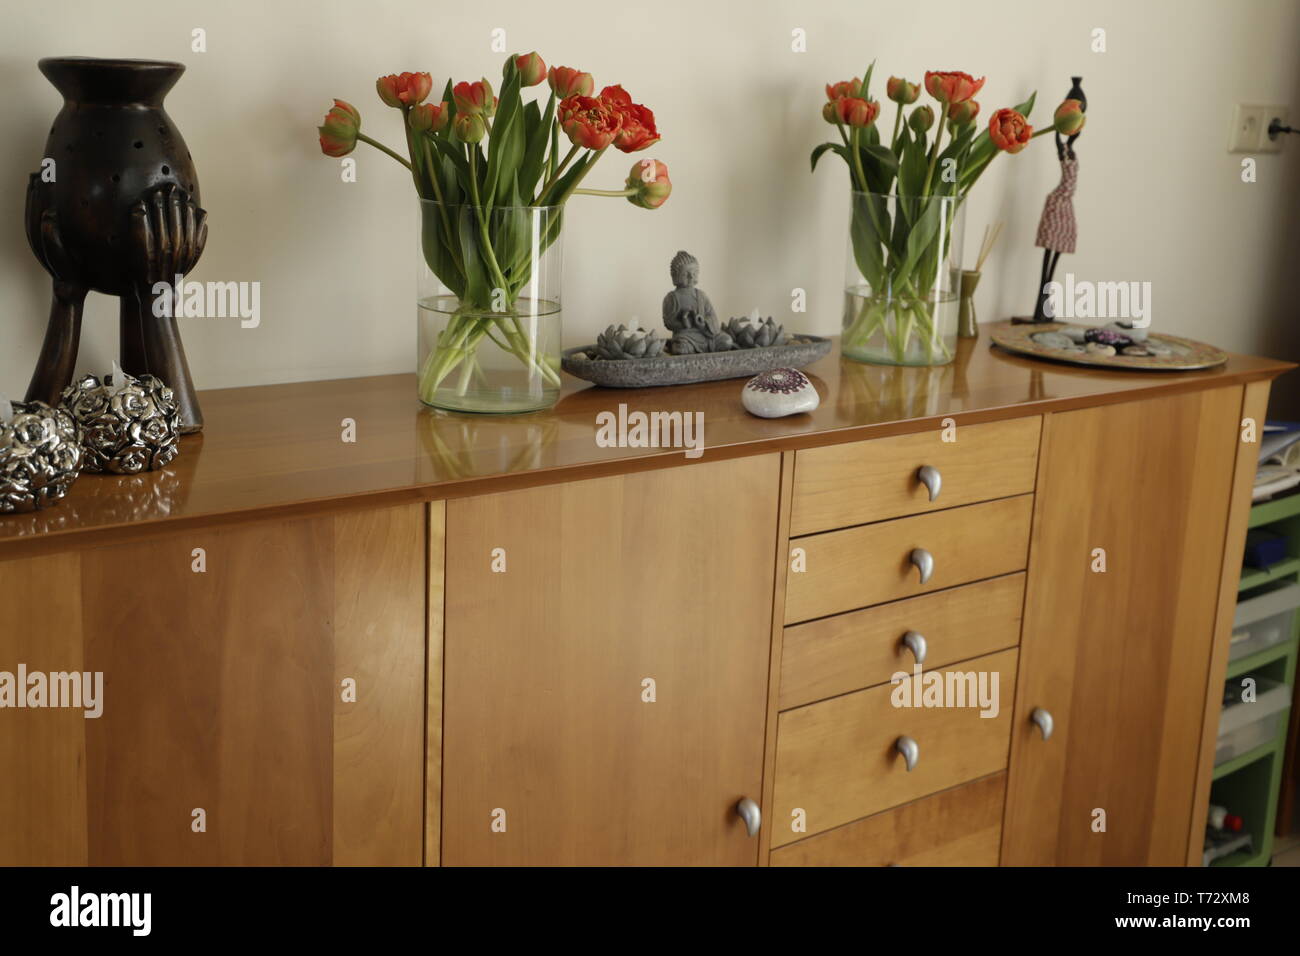 Two glass vases with peony tulips on a cupboard Stock Photo